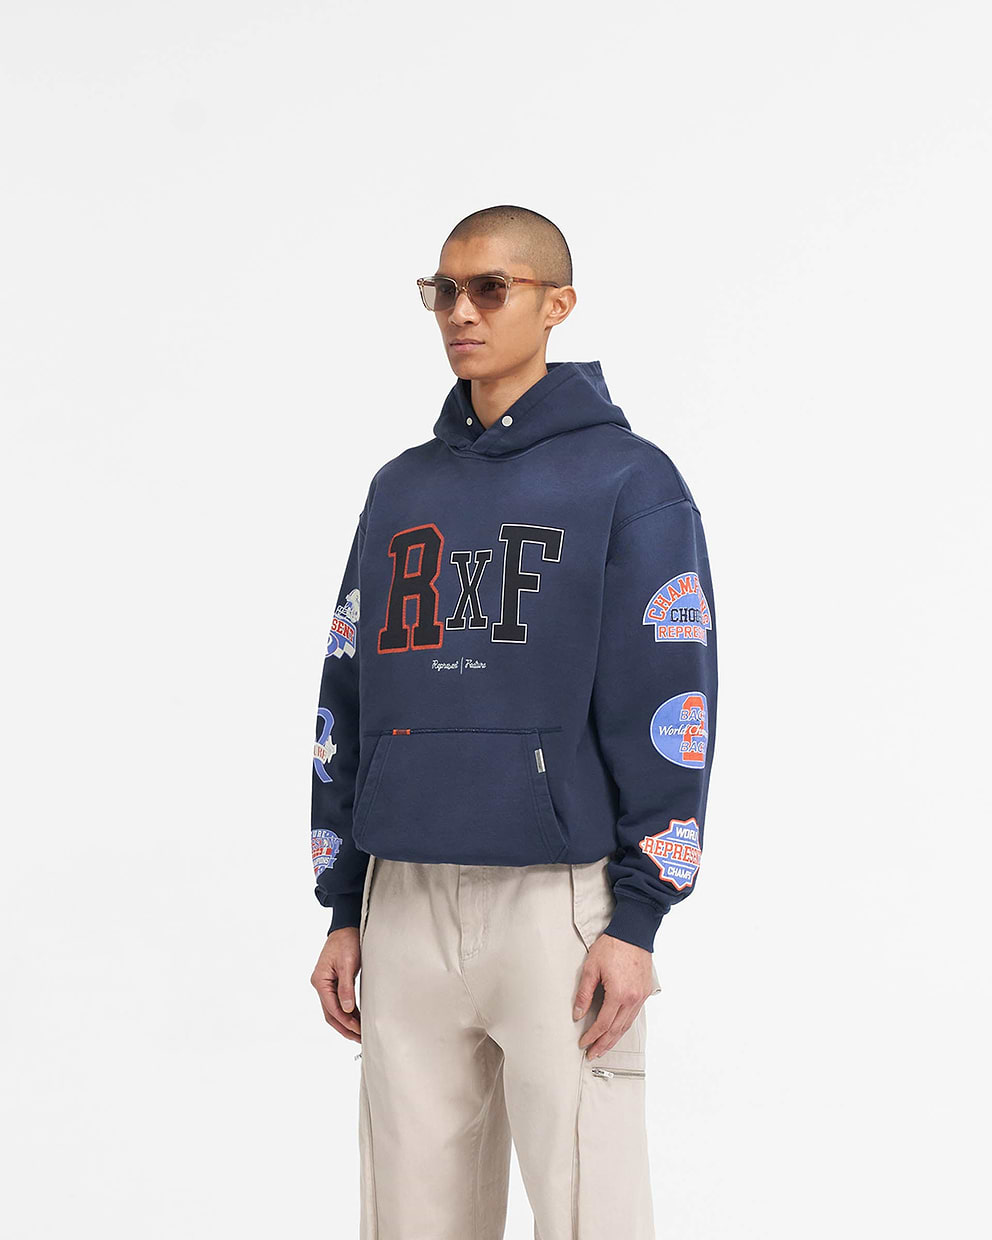 Represent X Feature Champions Hoodie - Midnight Navy